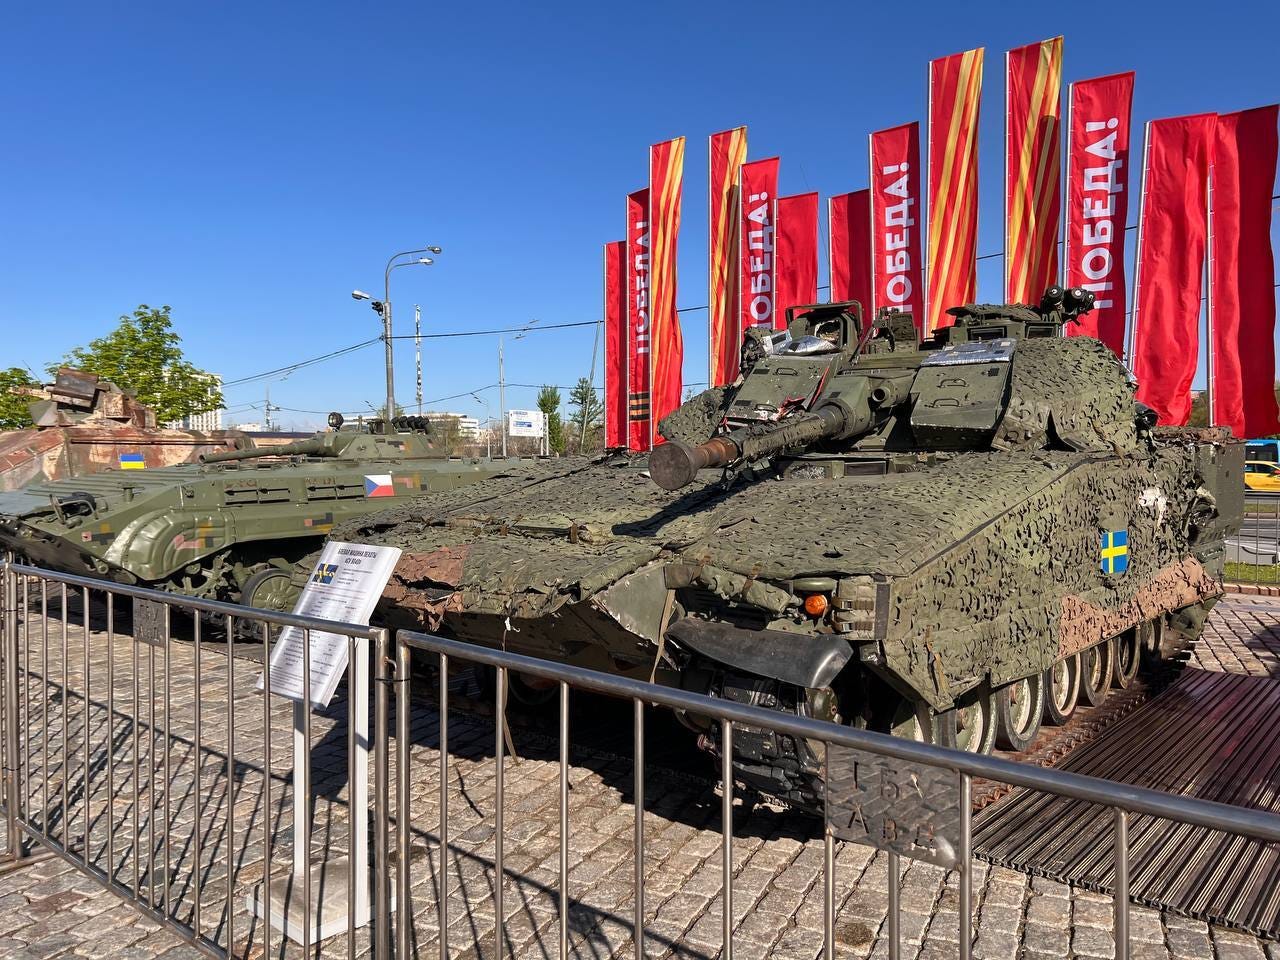 A Swedish-made CV90 is seen behind a fence.